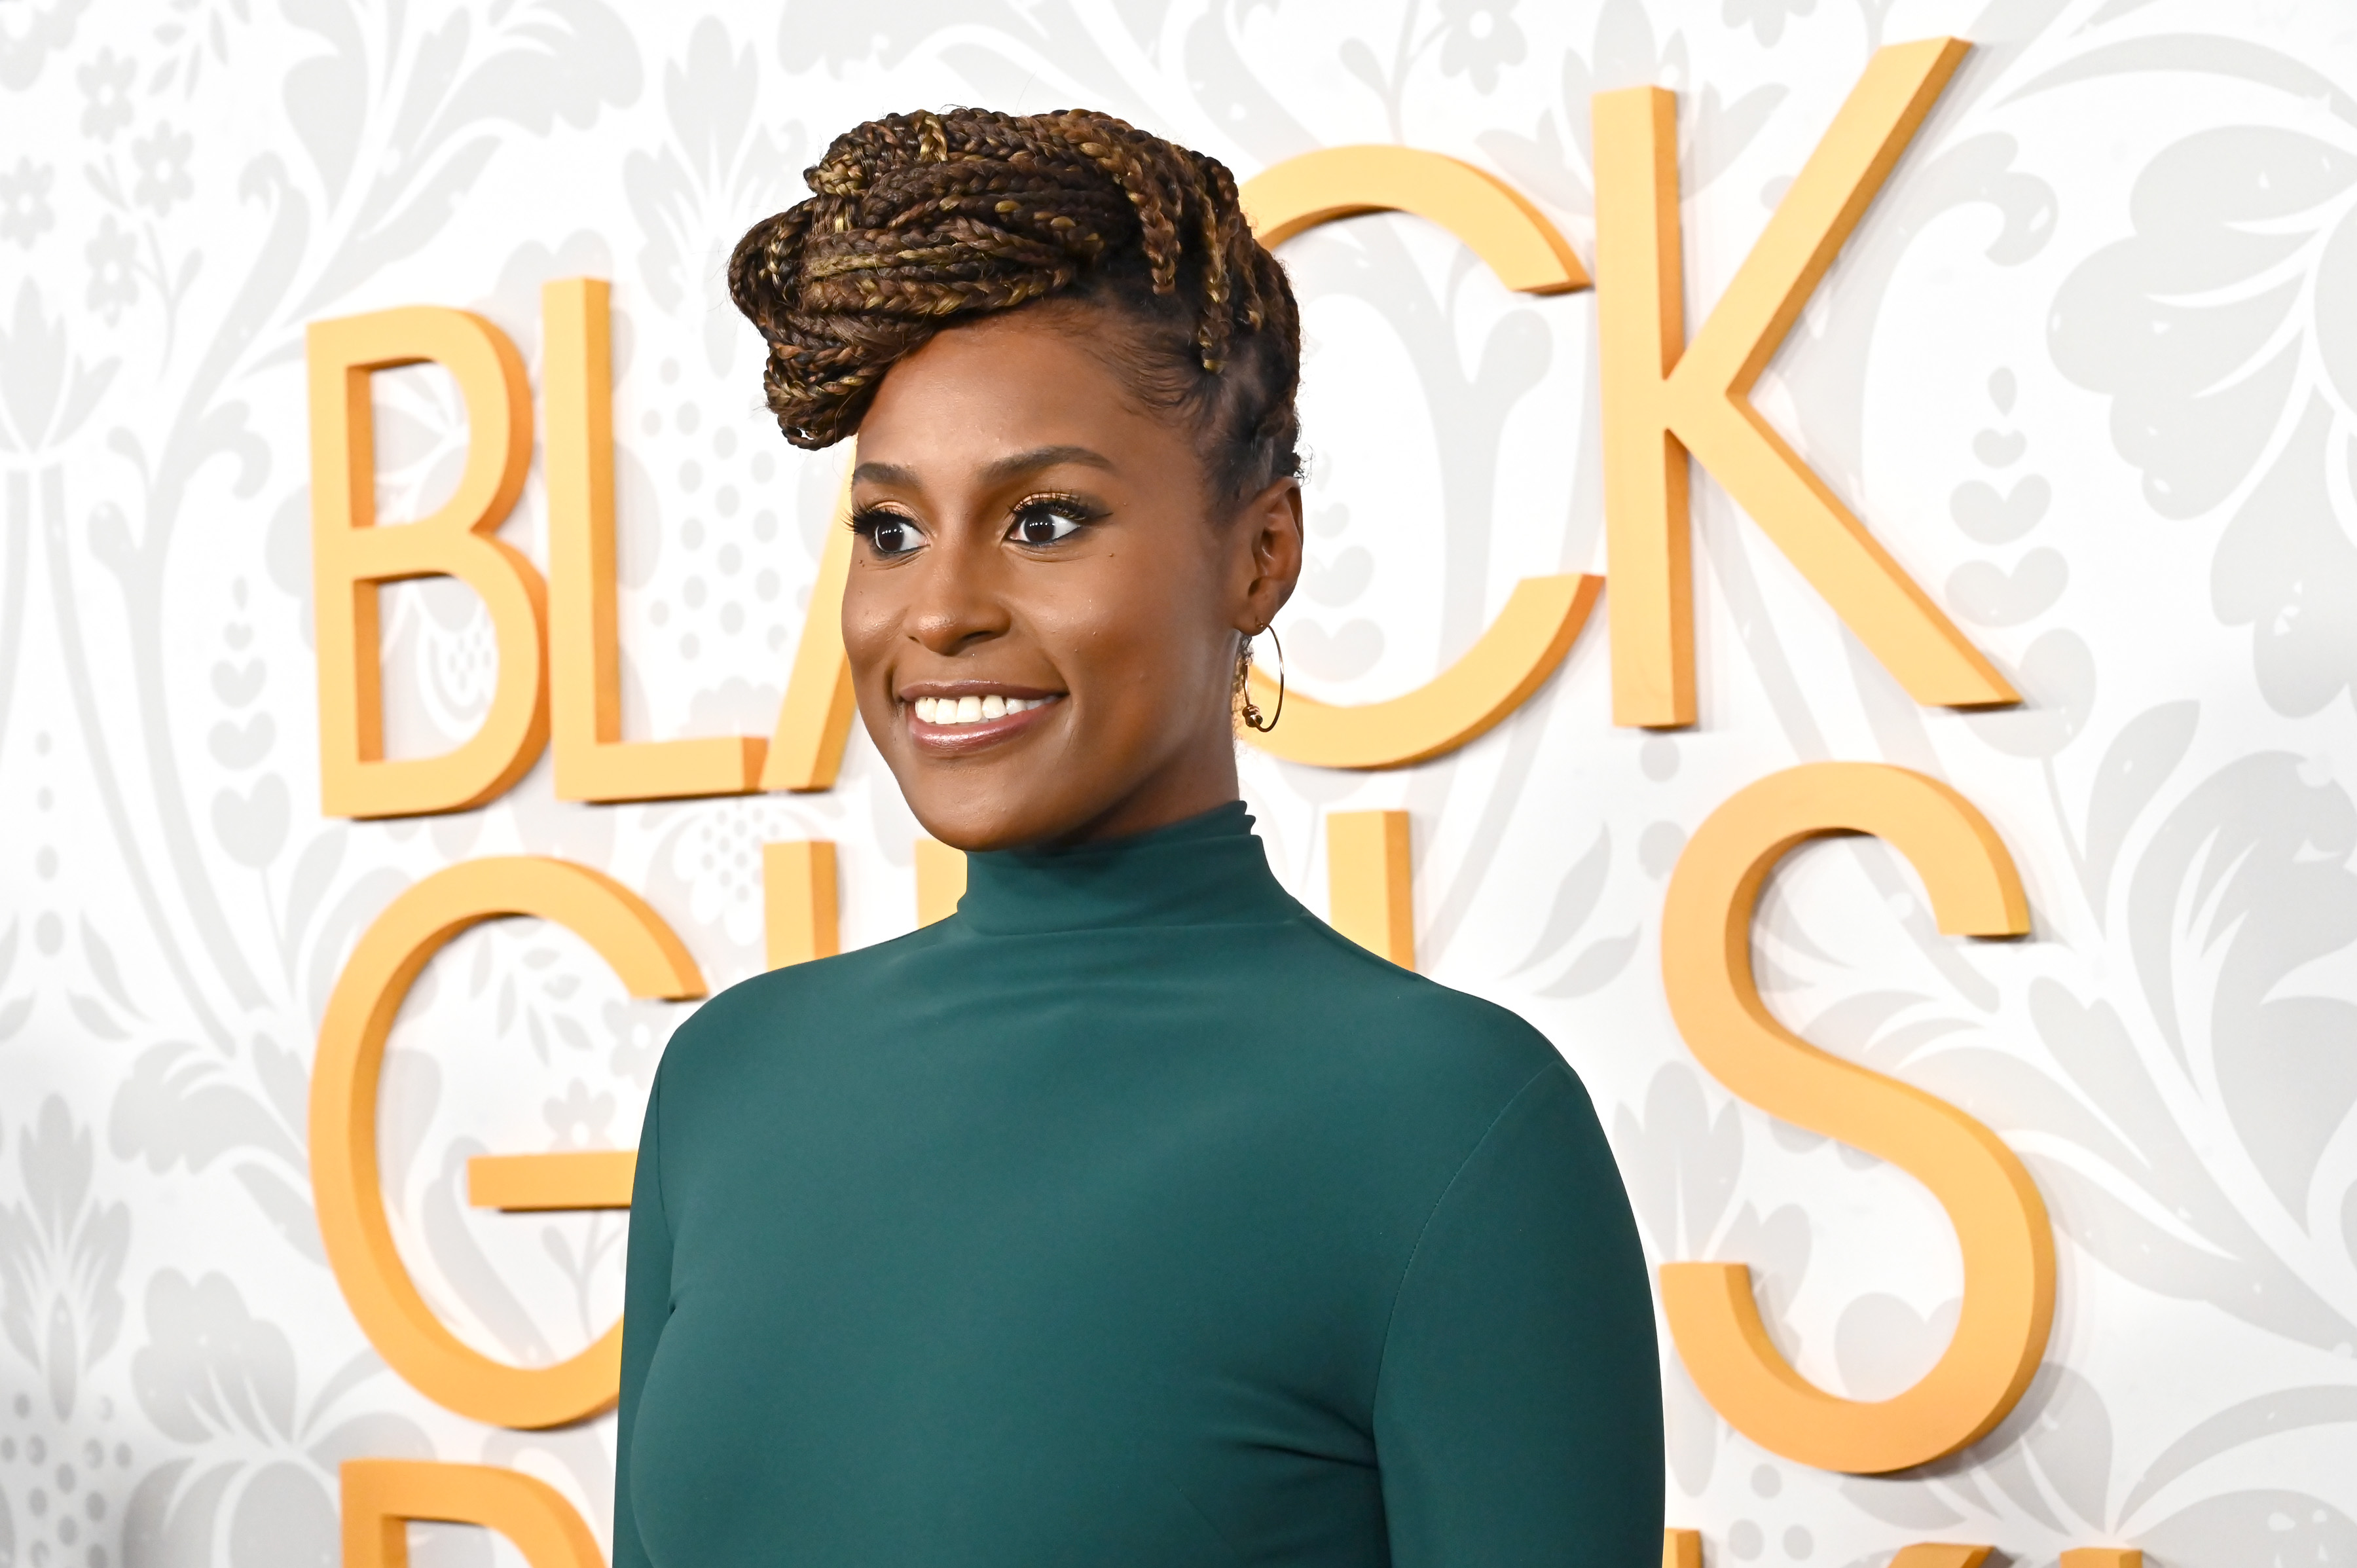 Issa Rae Shares New Trailer For “Rap Sh!t” Series